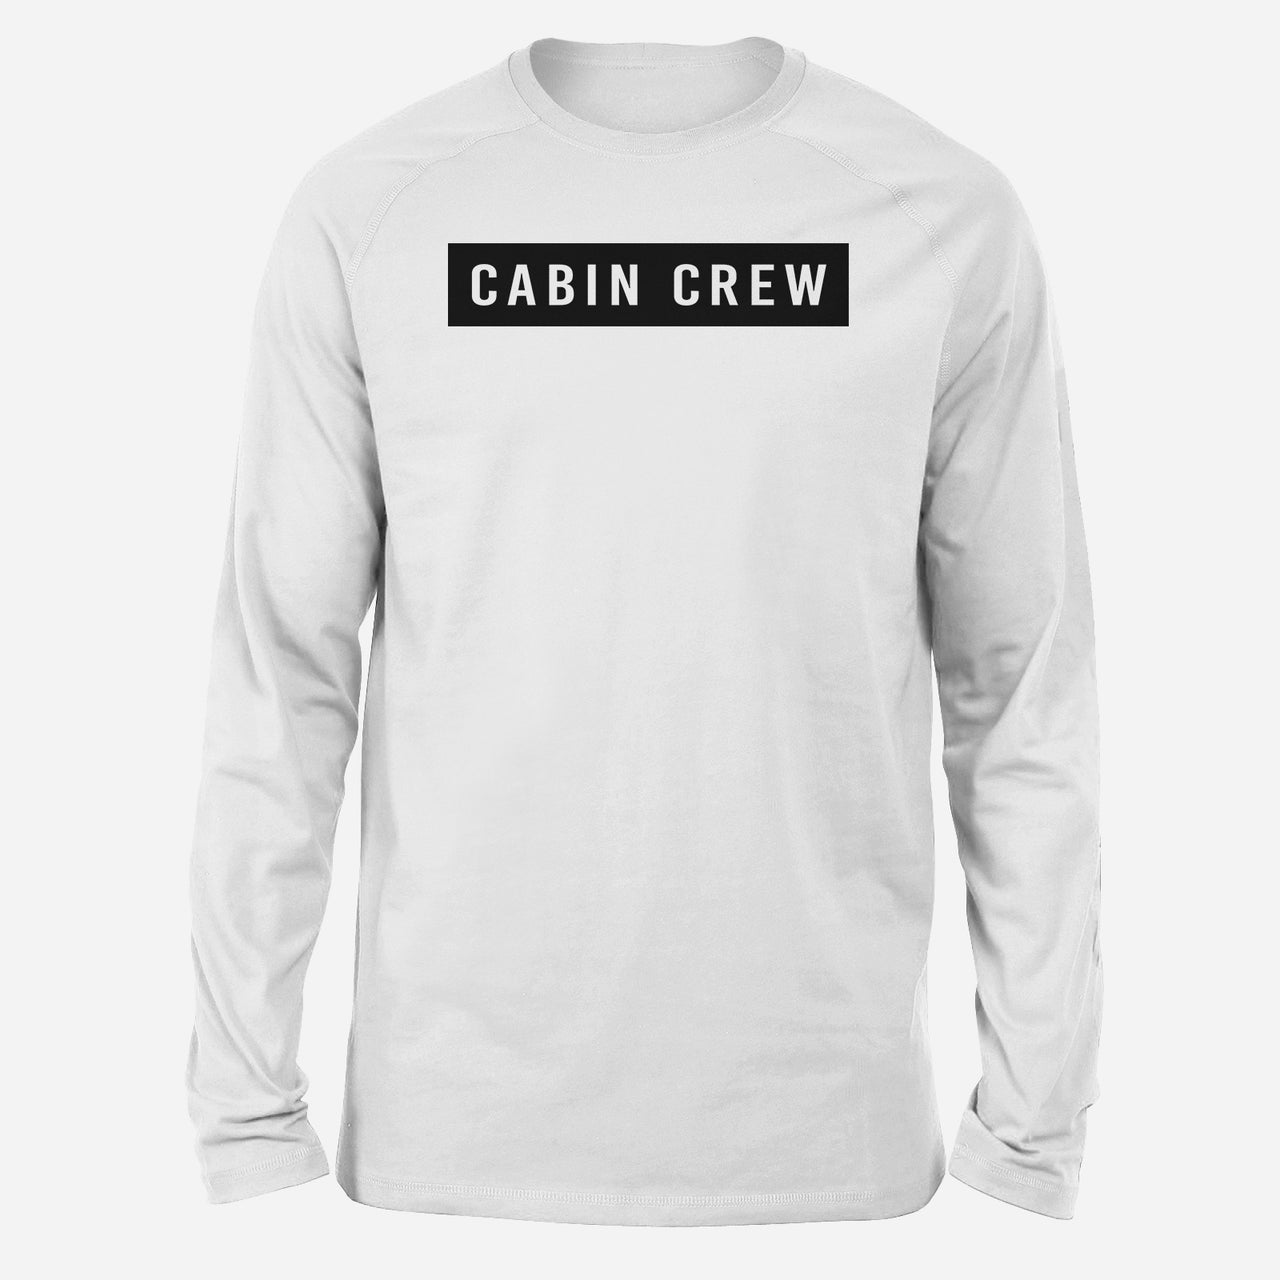 Cabin Crew Text Designed Long-Sleeve T-Shirts